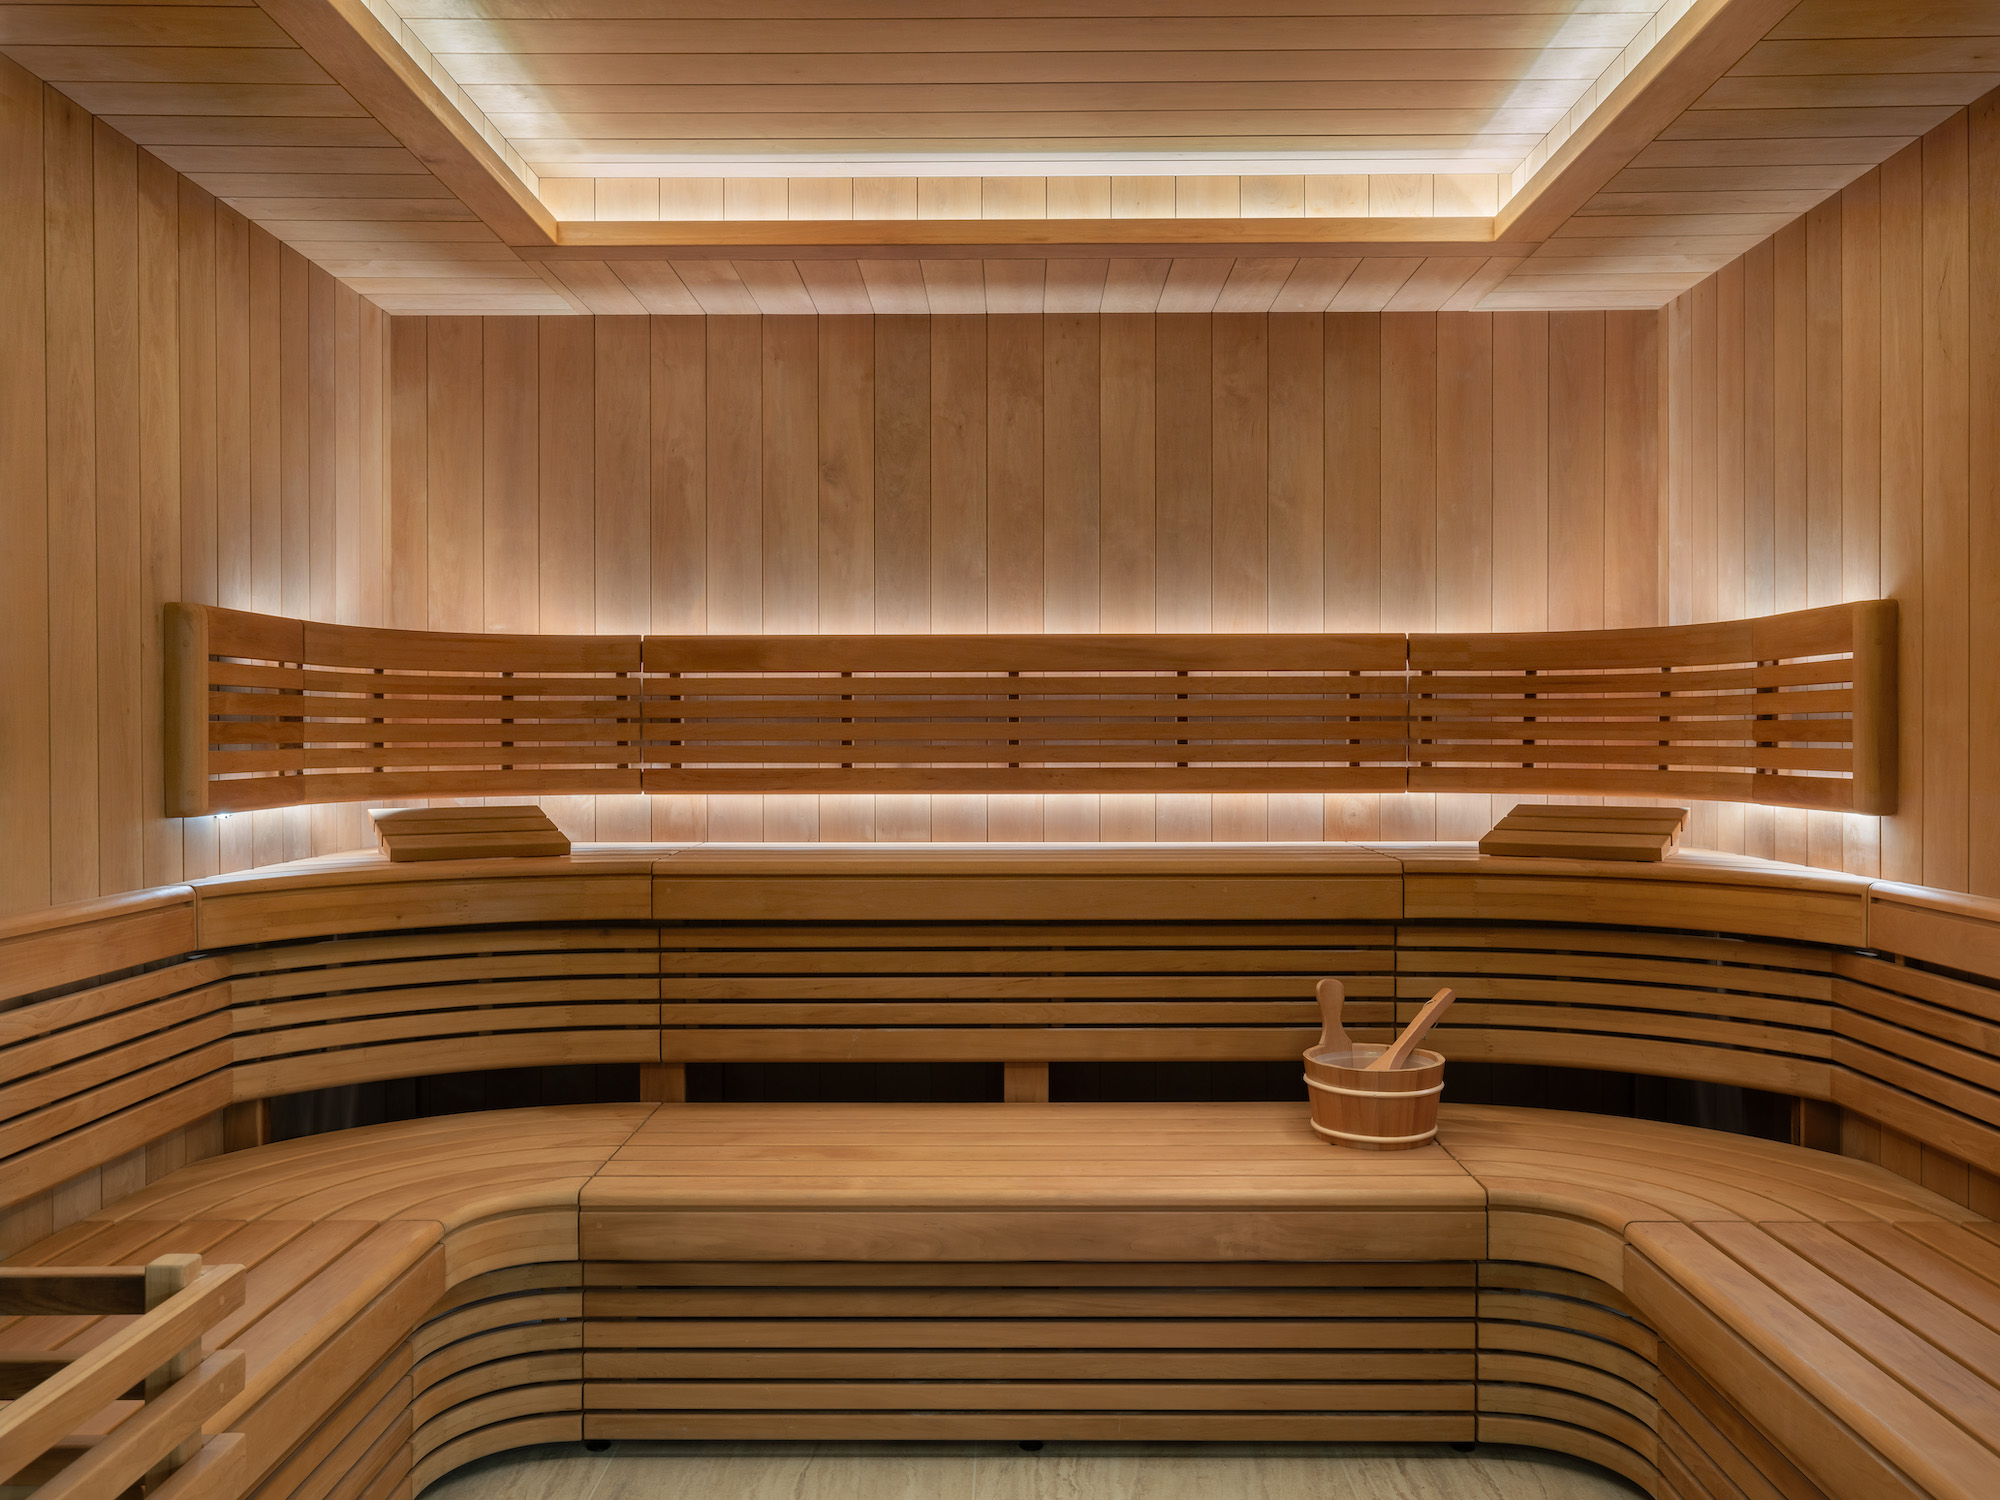 How sauna design evolved from the Stone Age to the age of luxury